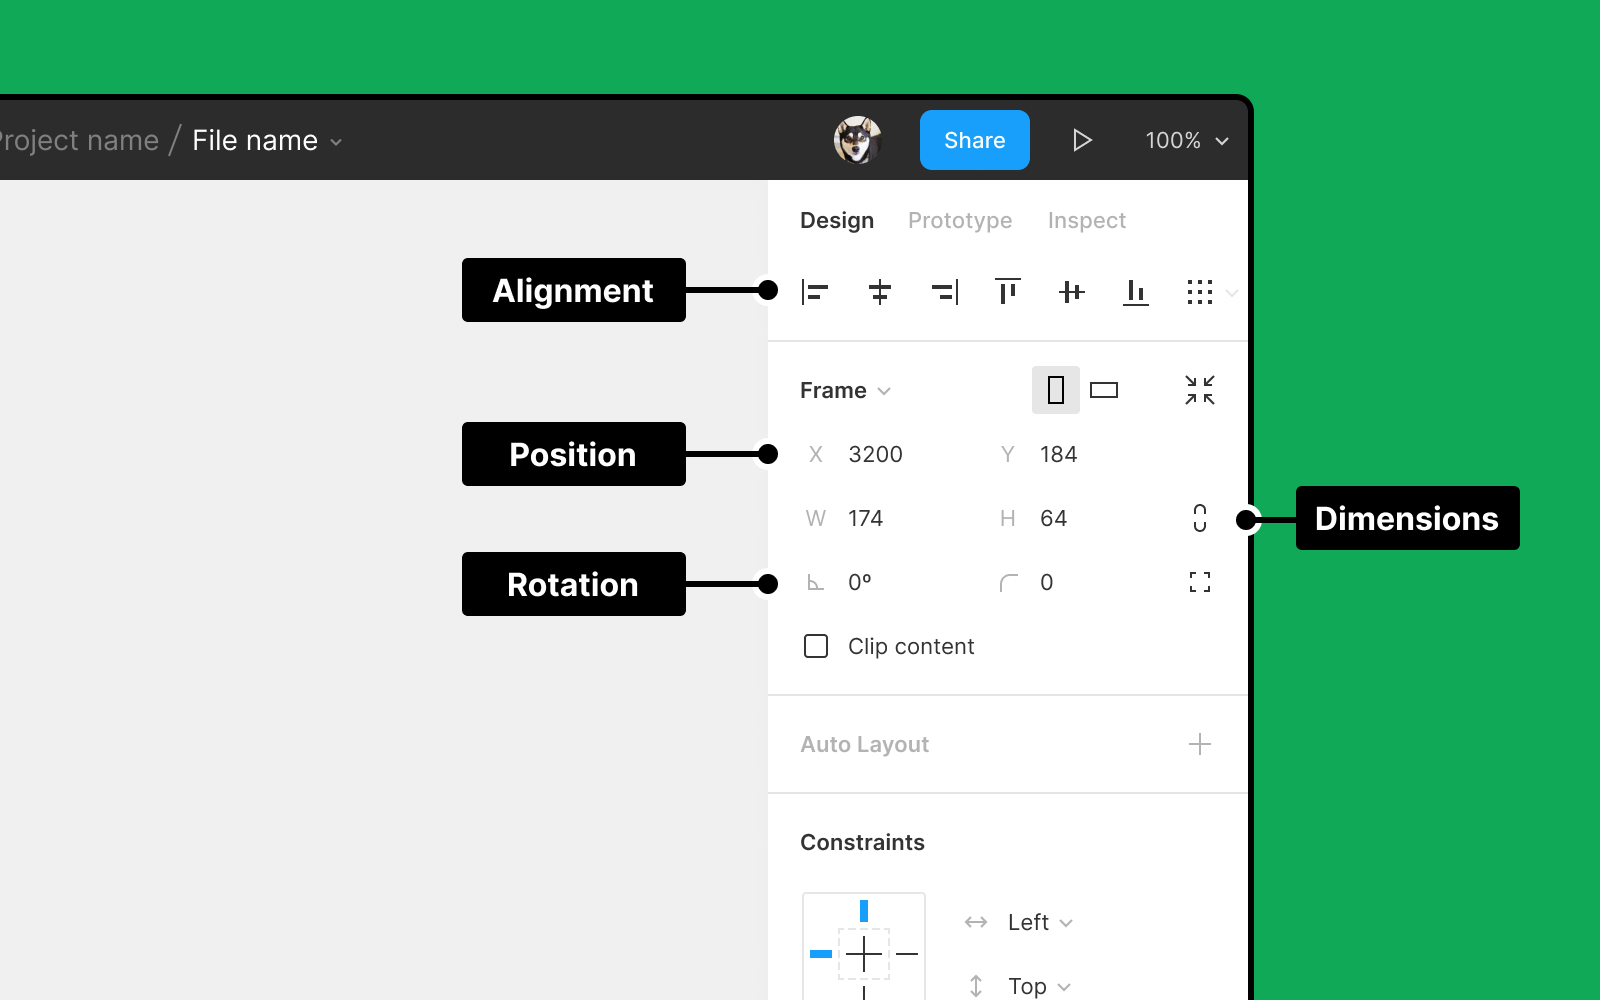 The right sidebar with the alignment, position, dimensions, and rotation fields identified